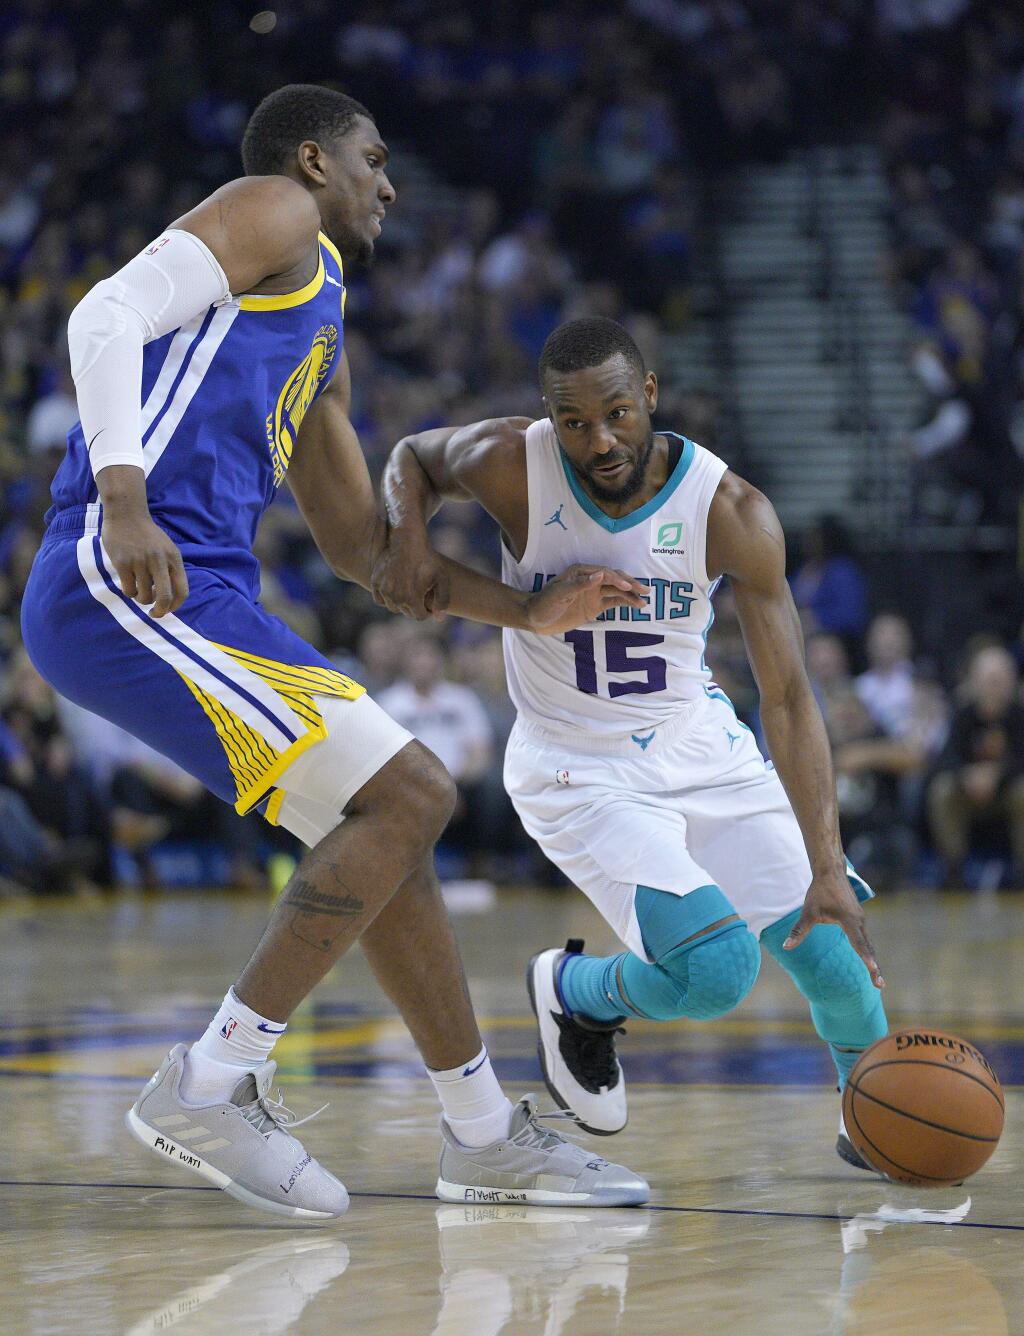 Charlotte Hornets guard Kemba Walker, right, dribbles past Golden State Warriors center Kevon Looney, left, during the first half of an NBA basketball game Sunday, March 31, 2019, in Oakland, Calif. (AP Photo/Tony Avelar)